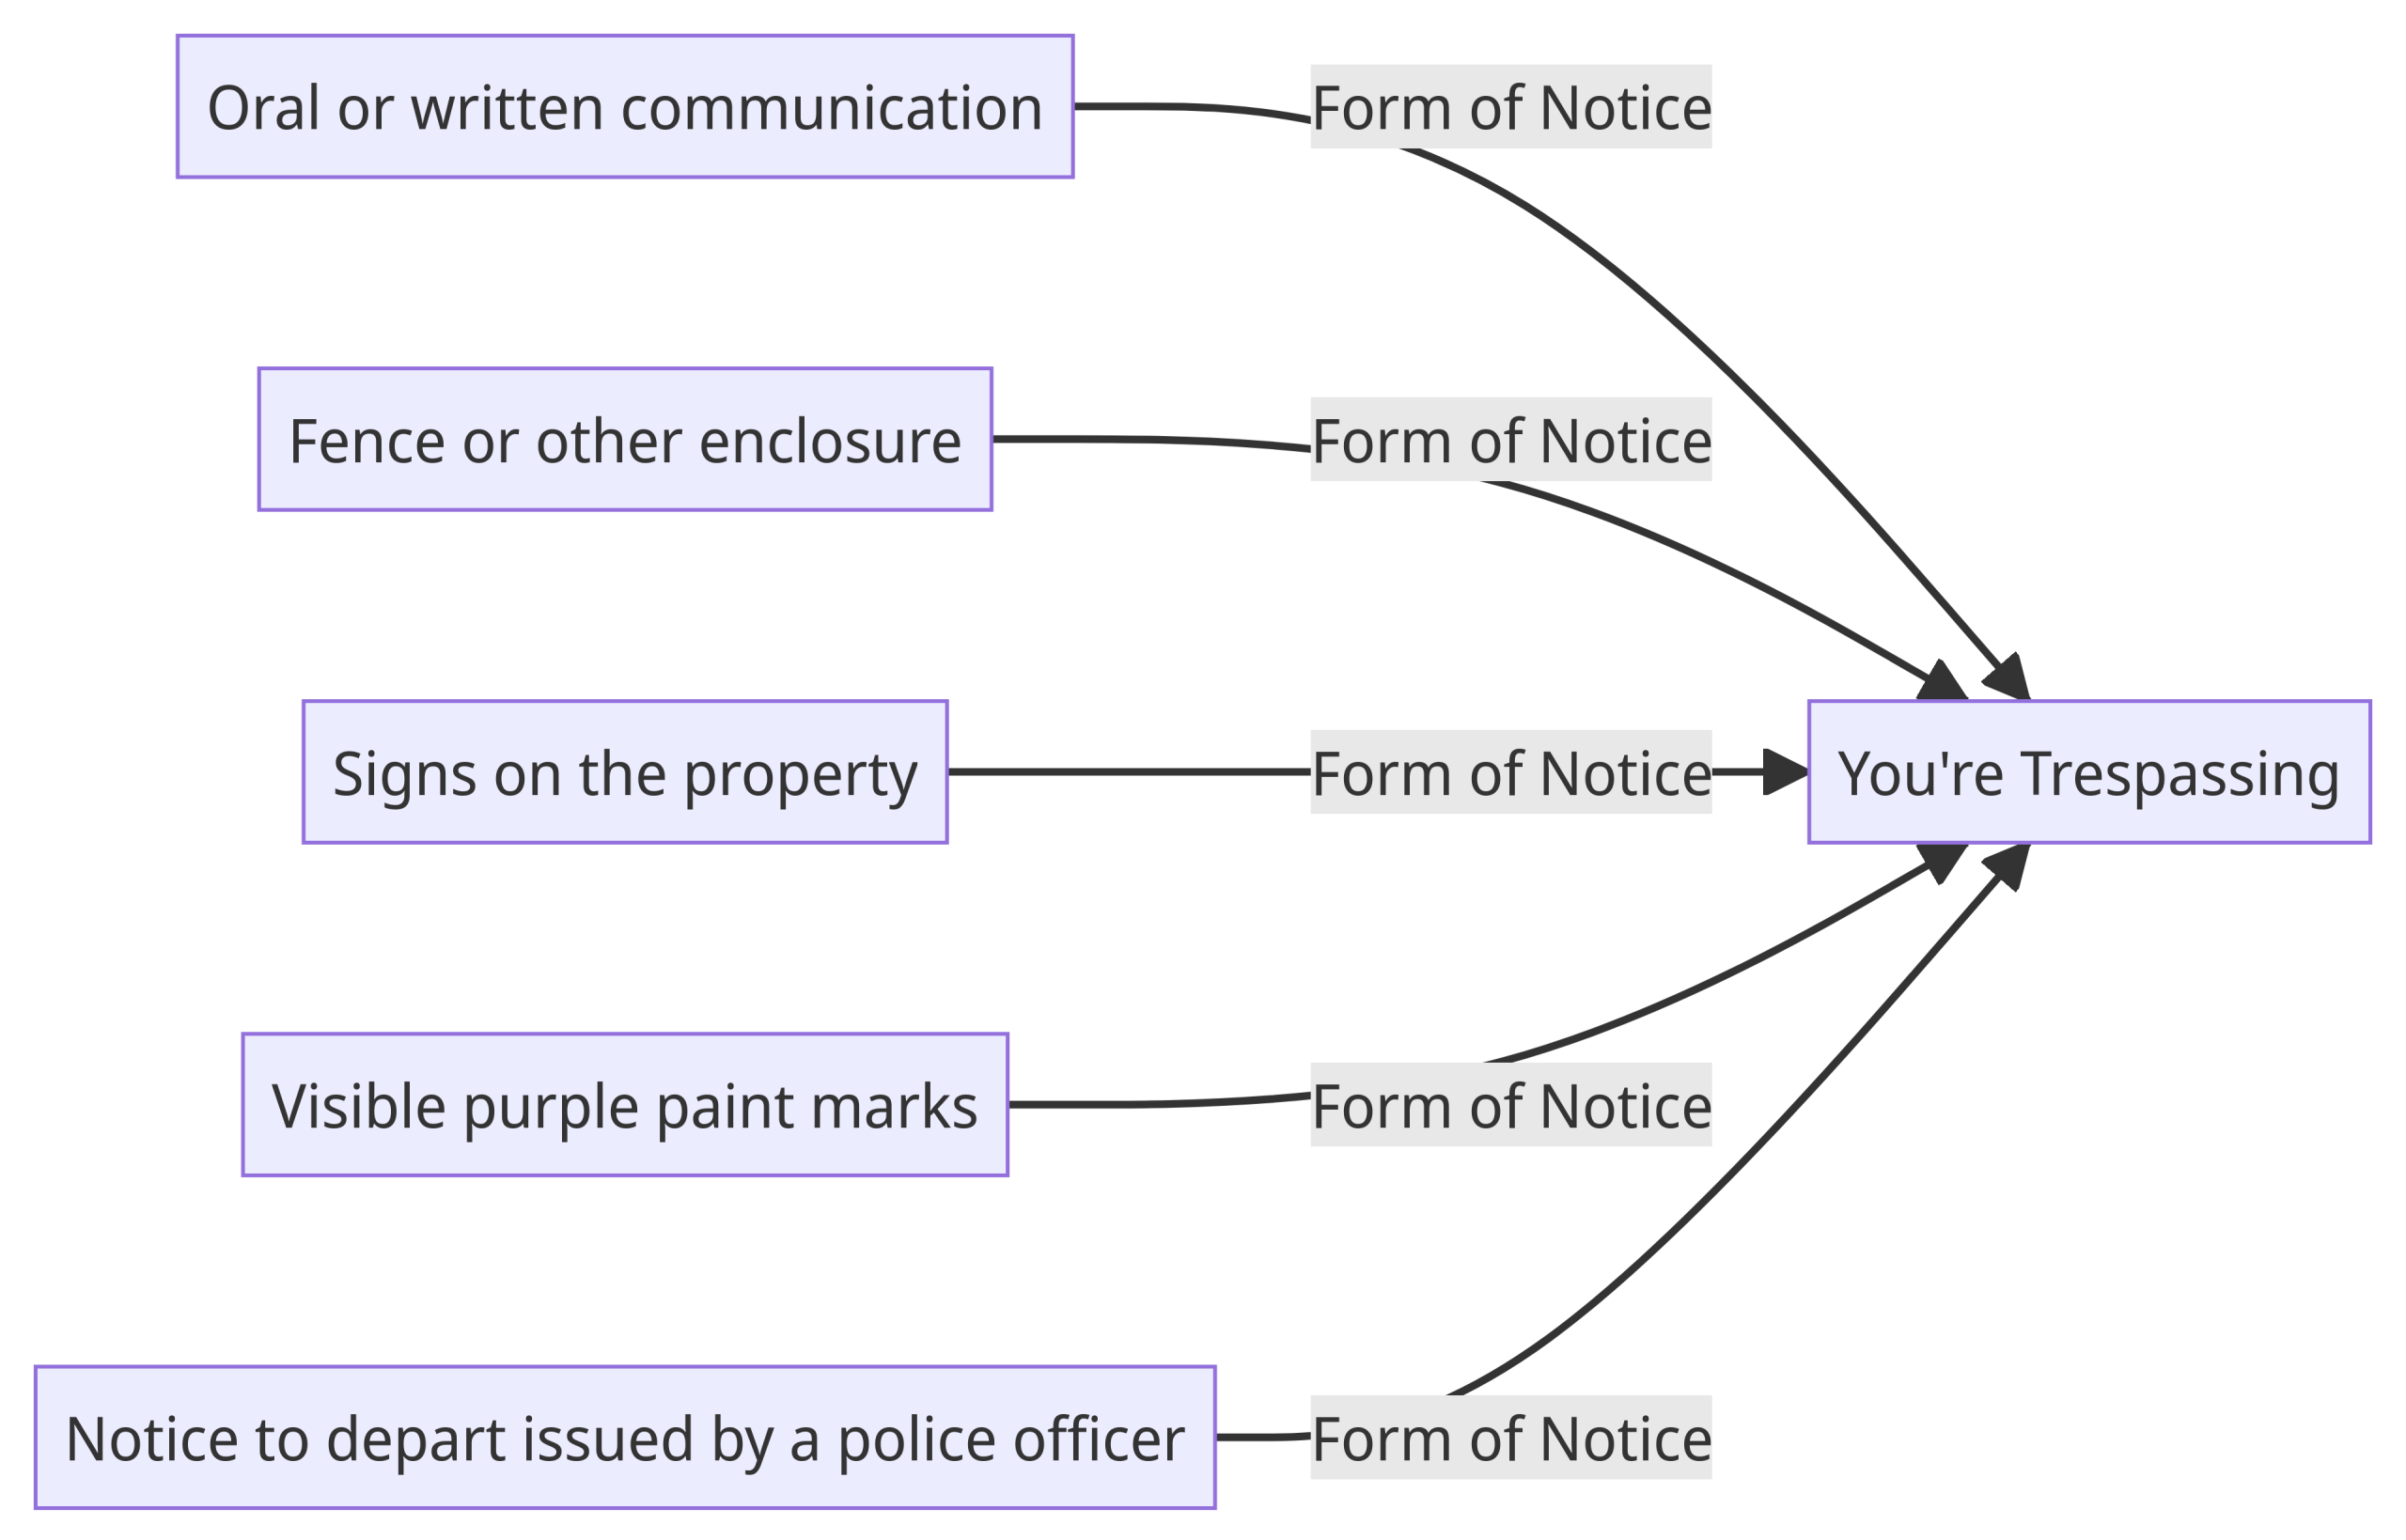 Five Forms of Notice